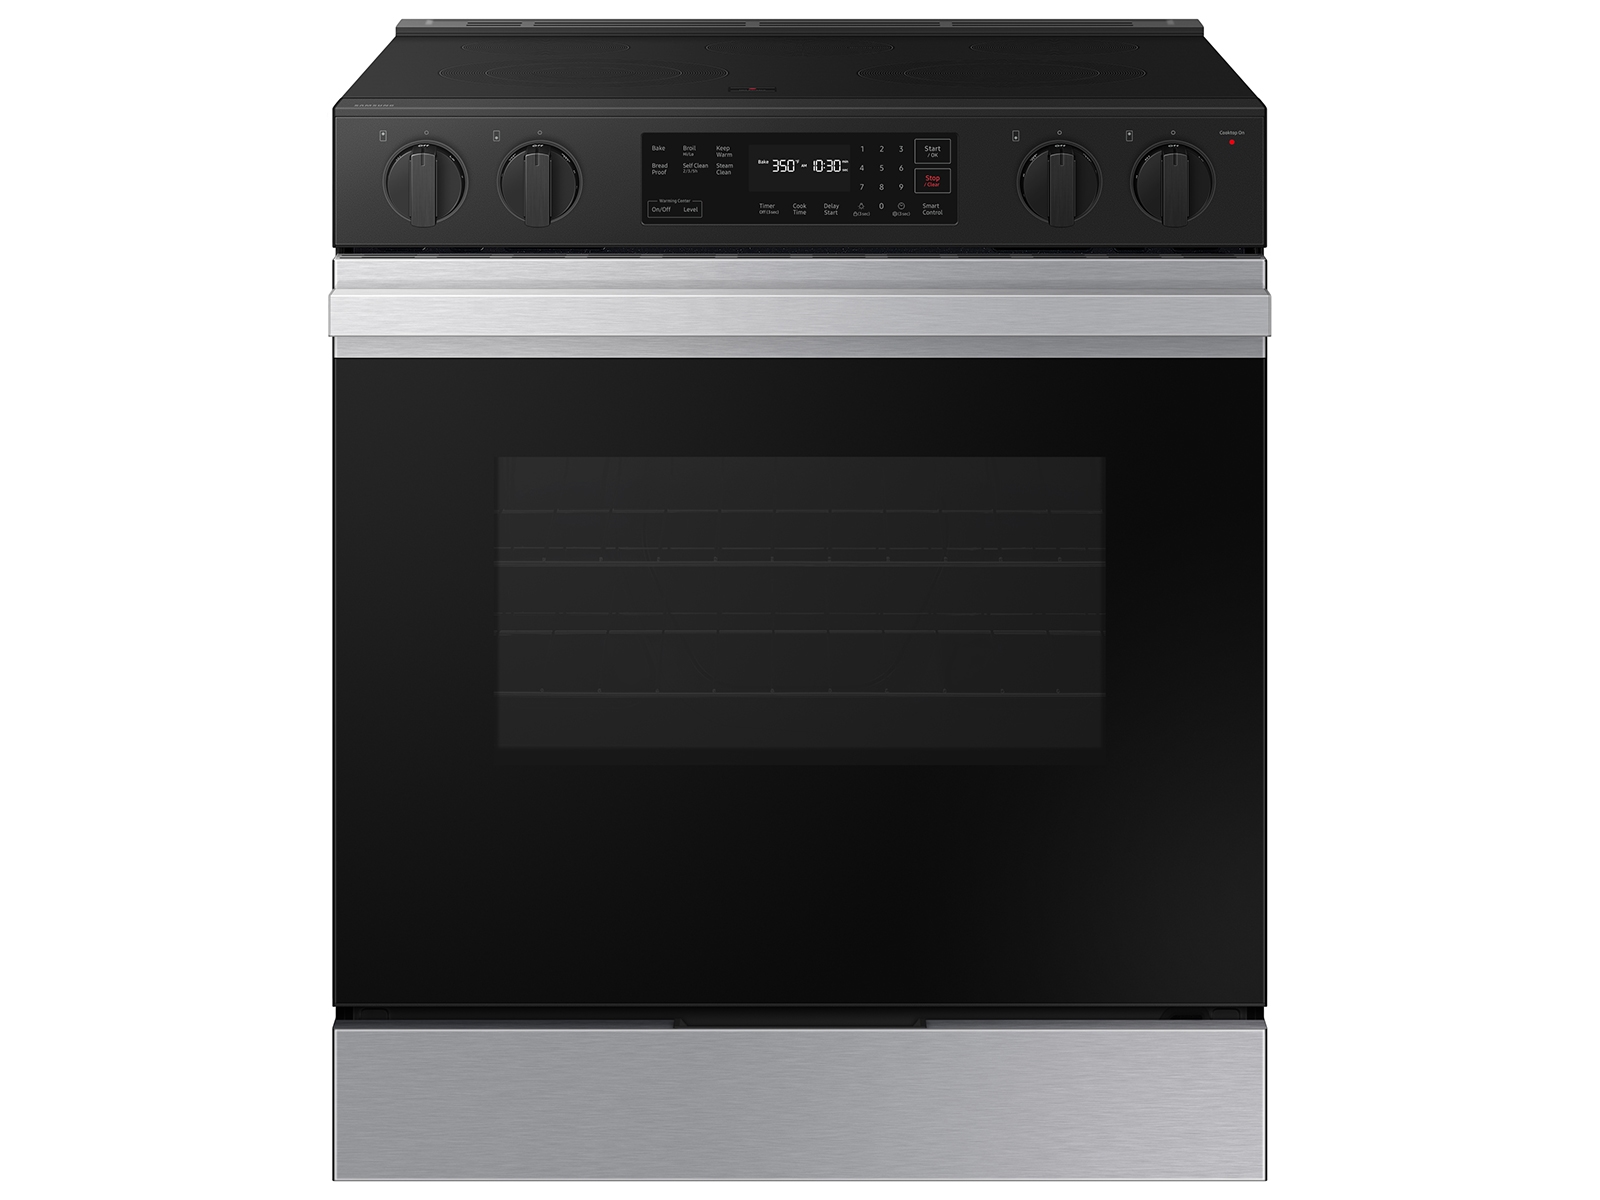 Bespoke Smart Slide-In Electric Range with Precision Knobs